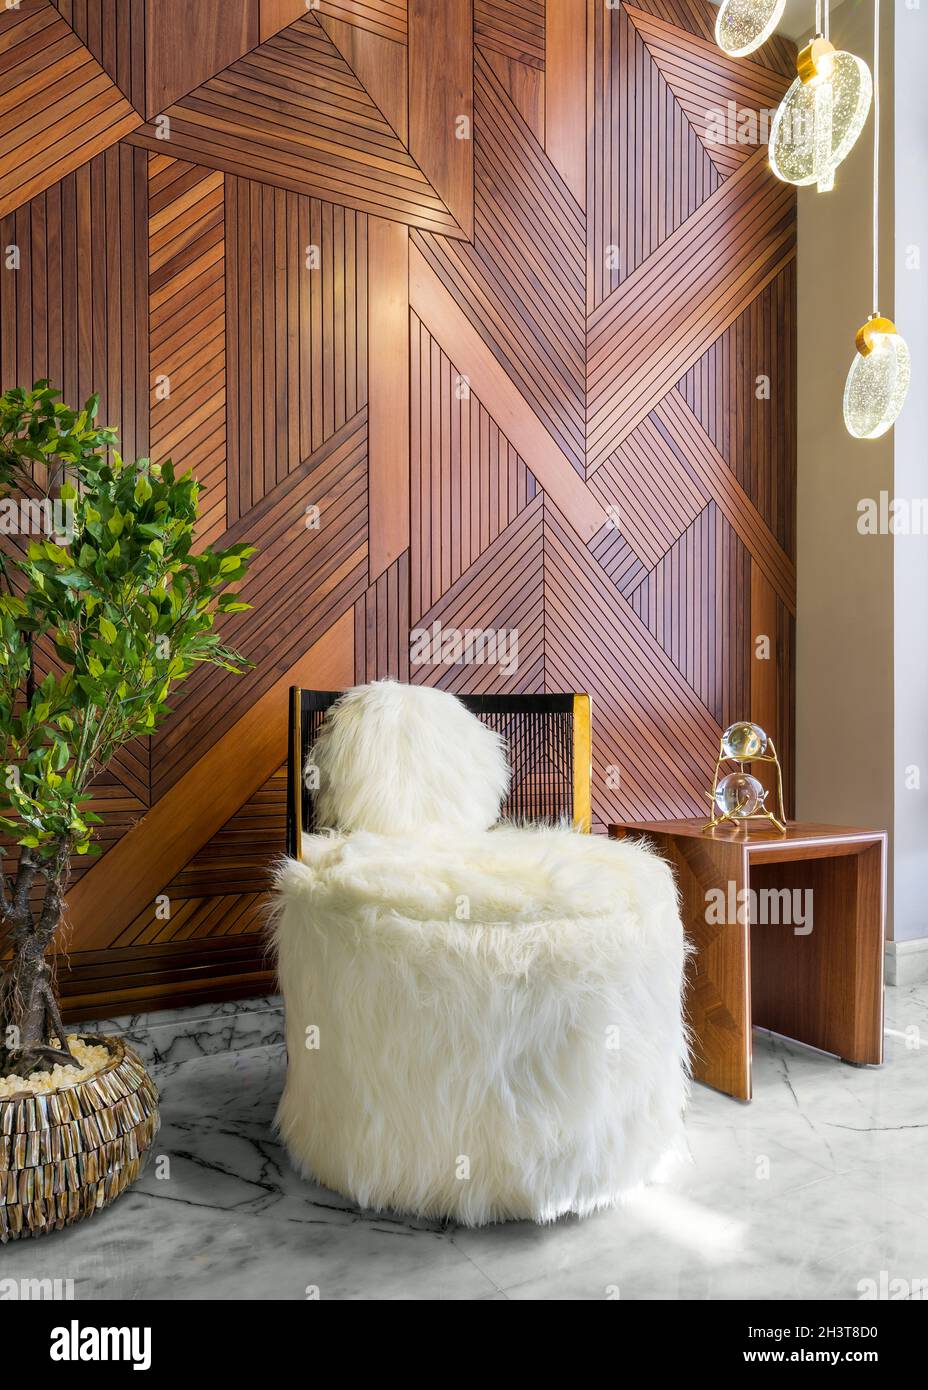 Modern white feather armless chair, small wooden modern table, and planter with green bushes, in a hall with decorated wood cladding wall, and white marble floor Stock Photo